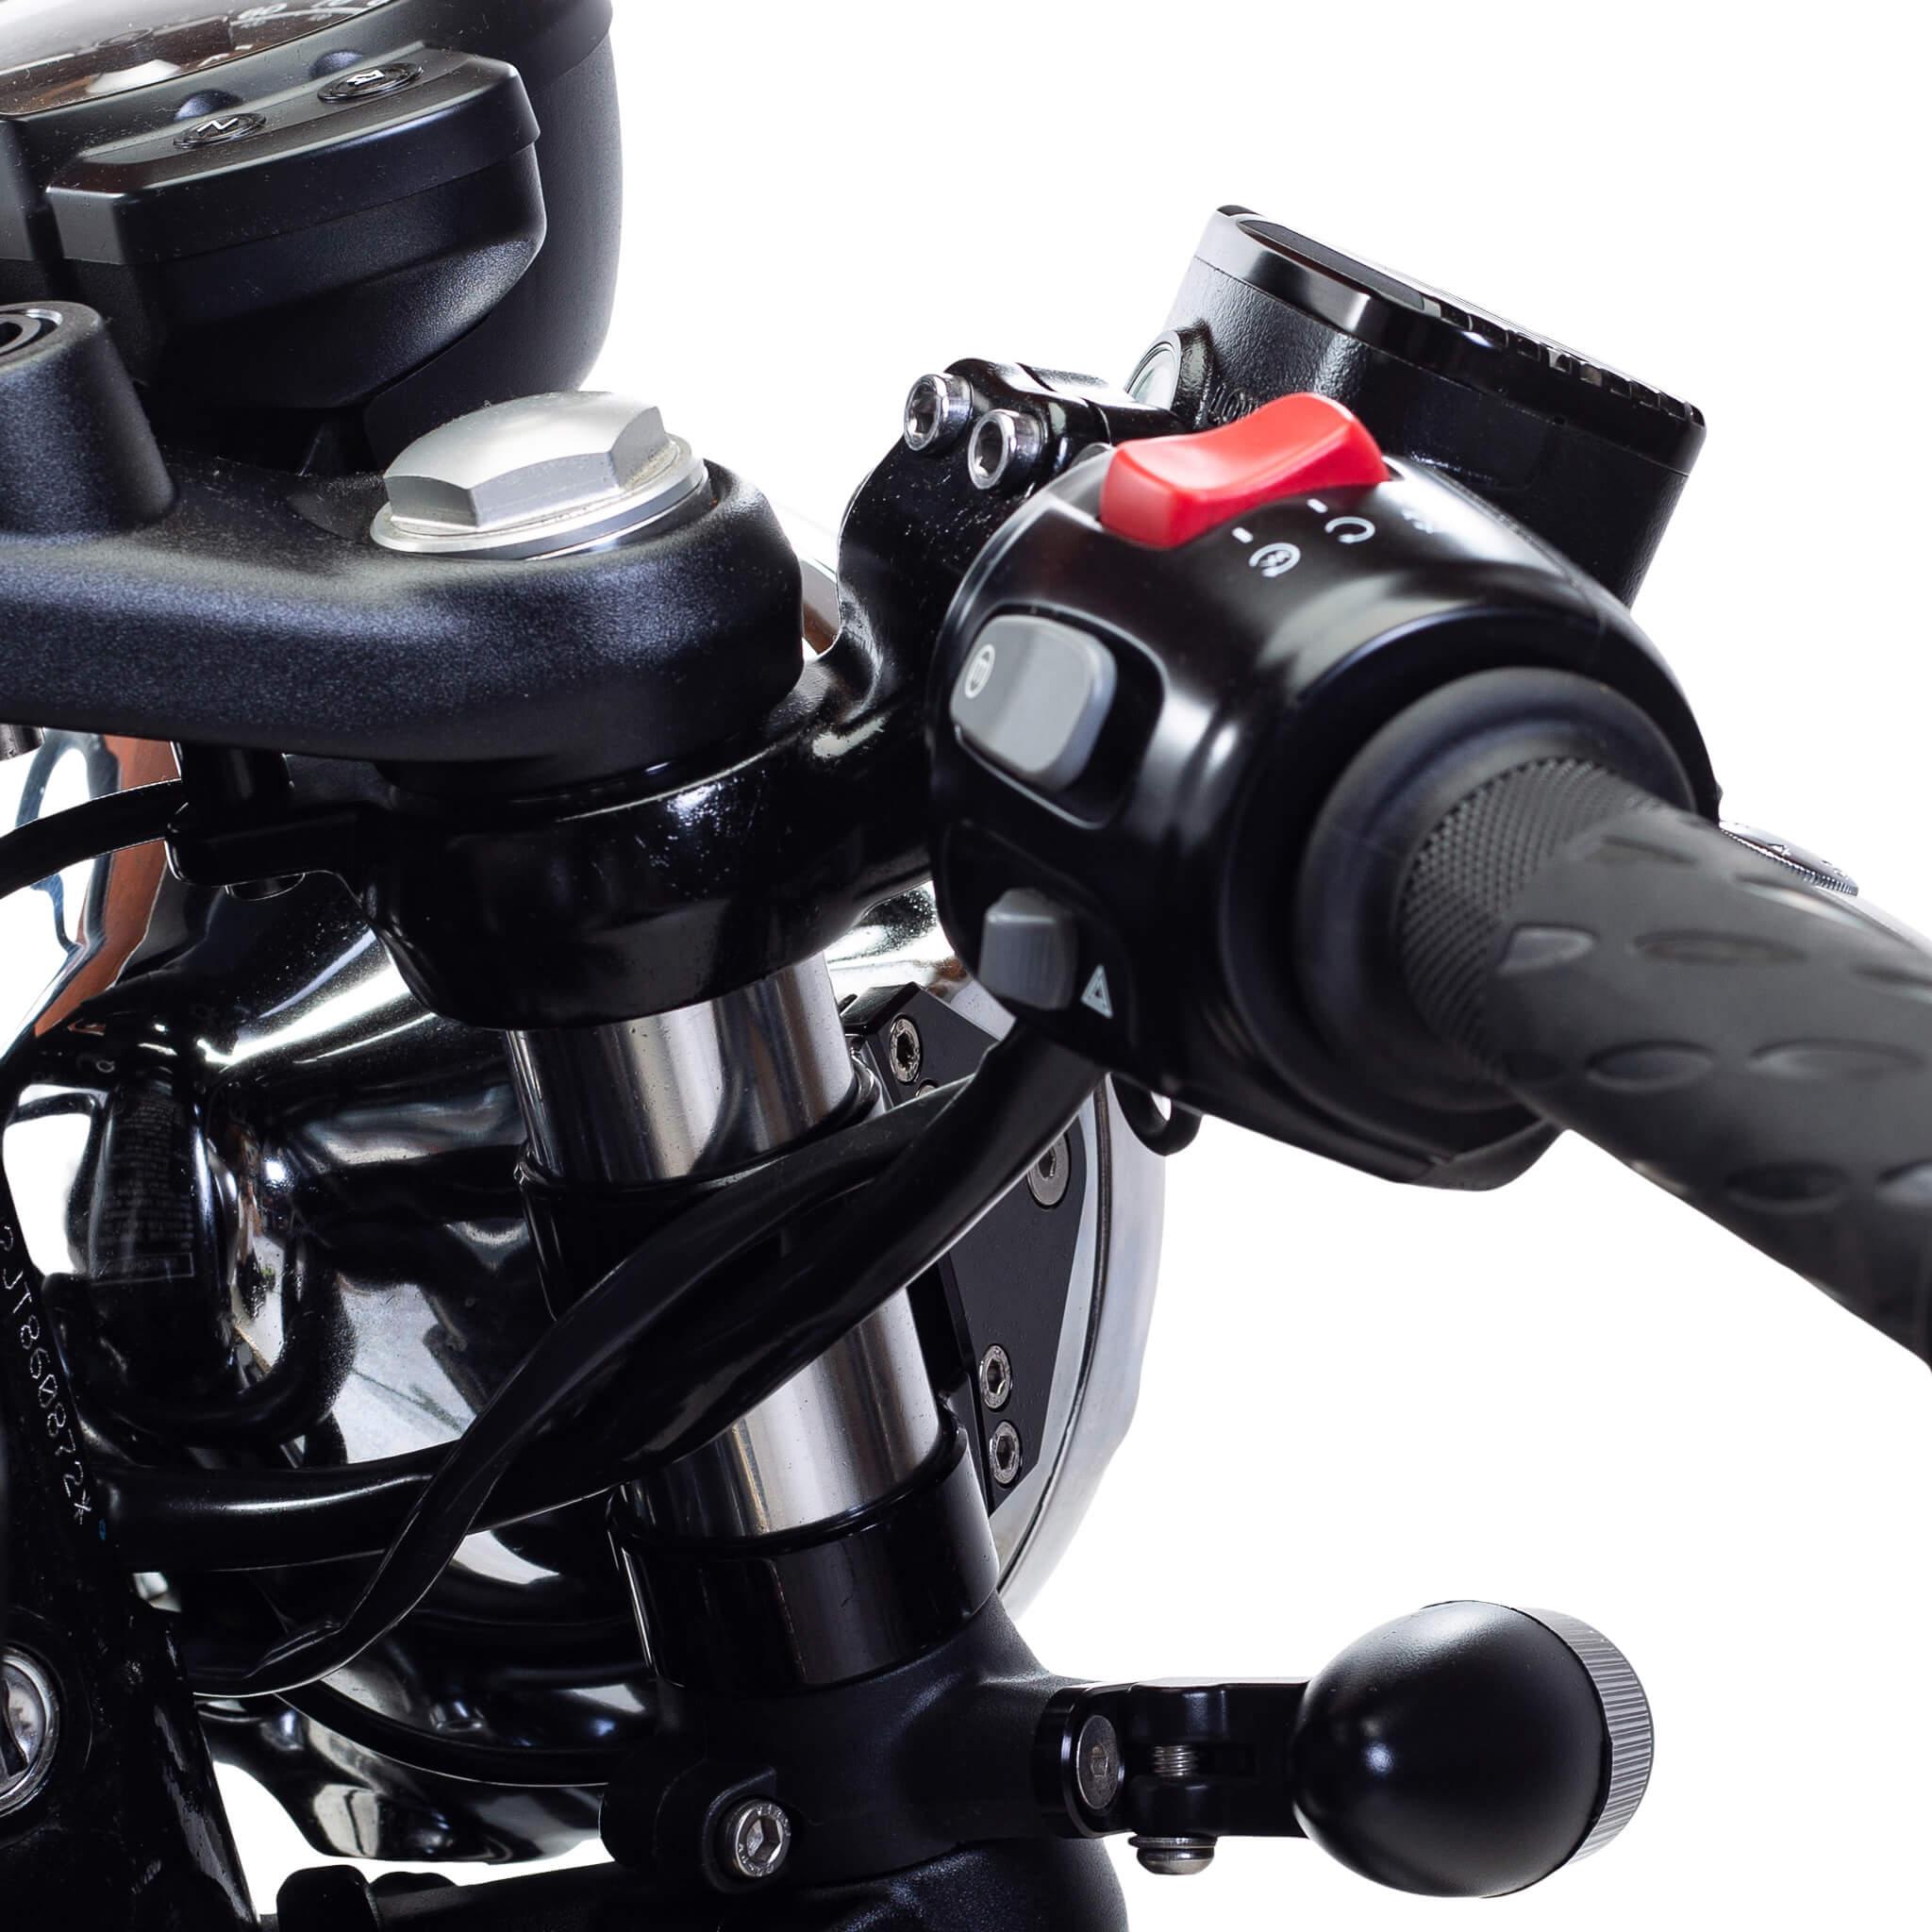 Top-Notch 7 Inch Low Profile  Headlight Kit for Triumph Bobber